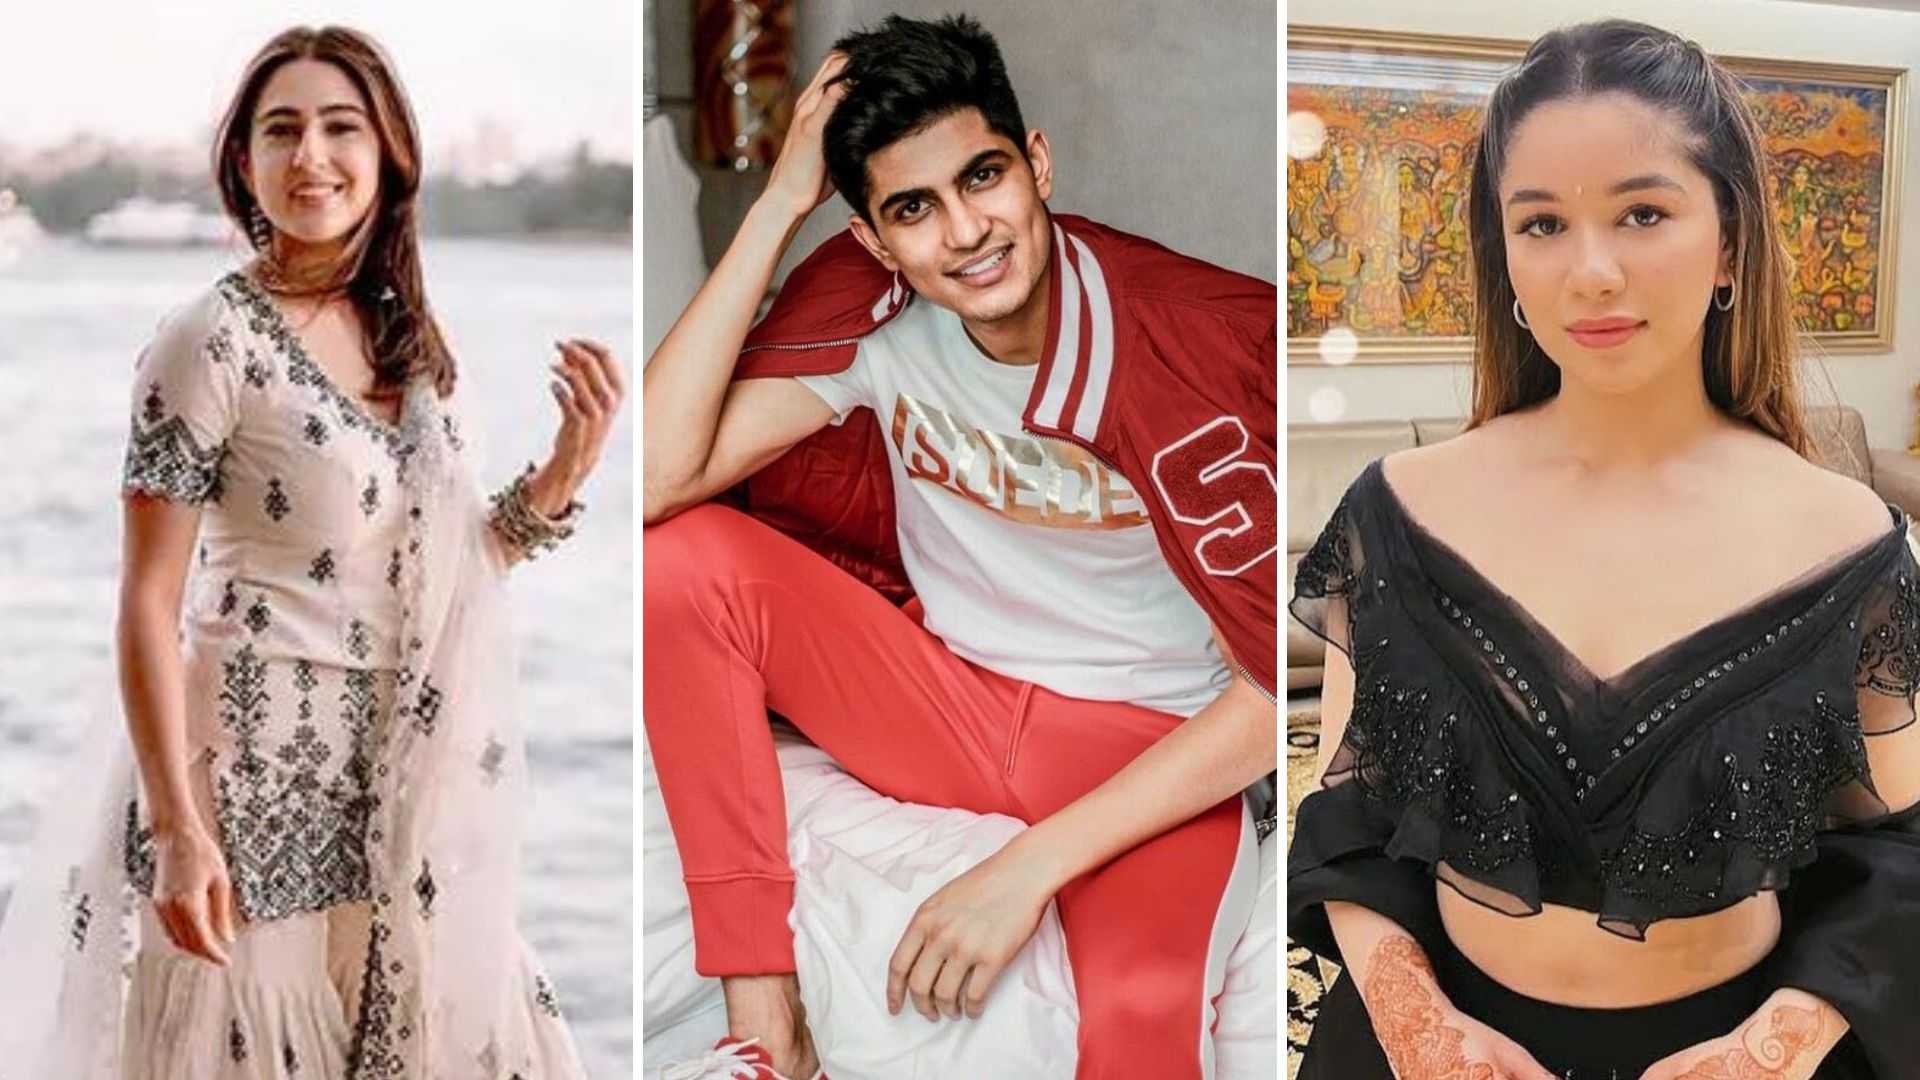 Shubman Gill’s current lady love is Sara, but we’re not talking about Sara Ali Khan